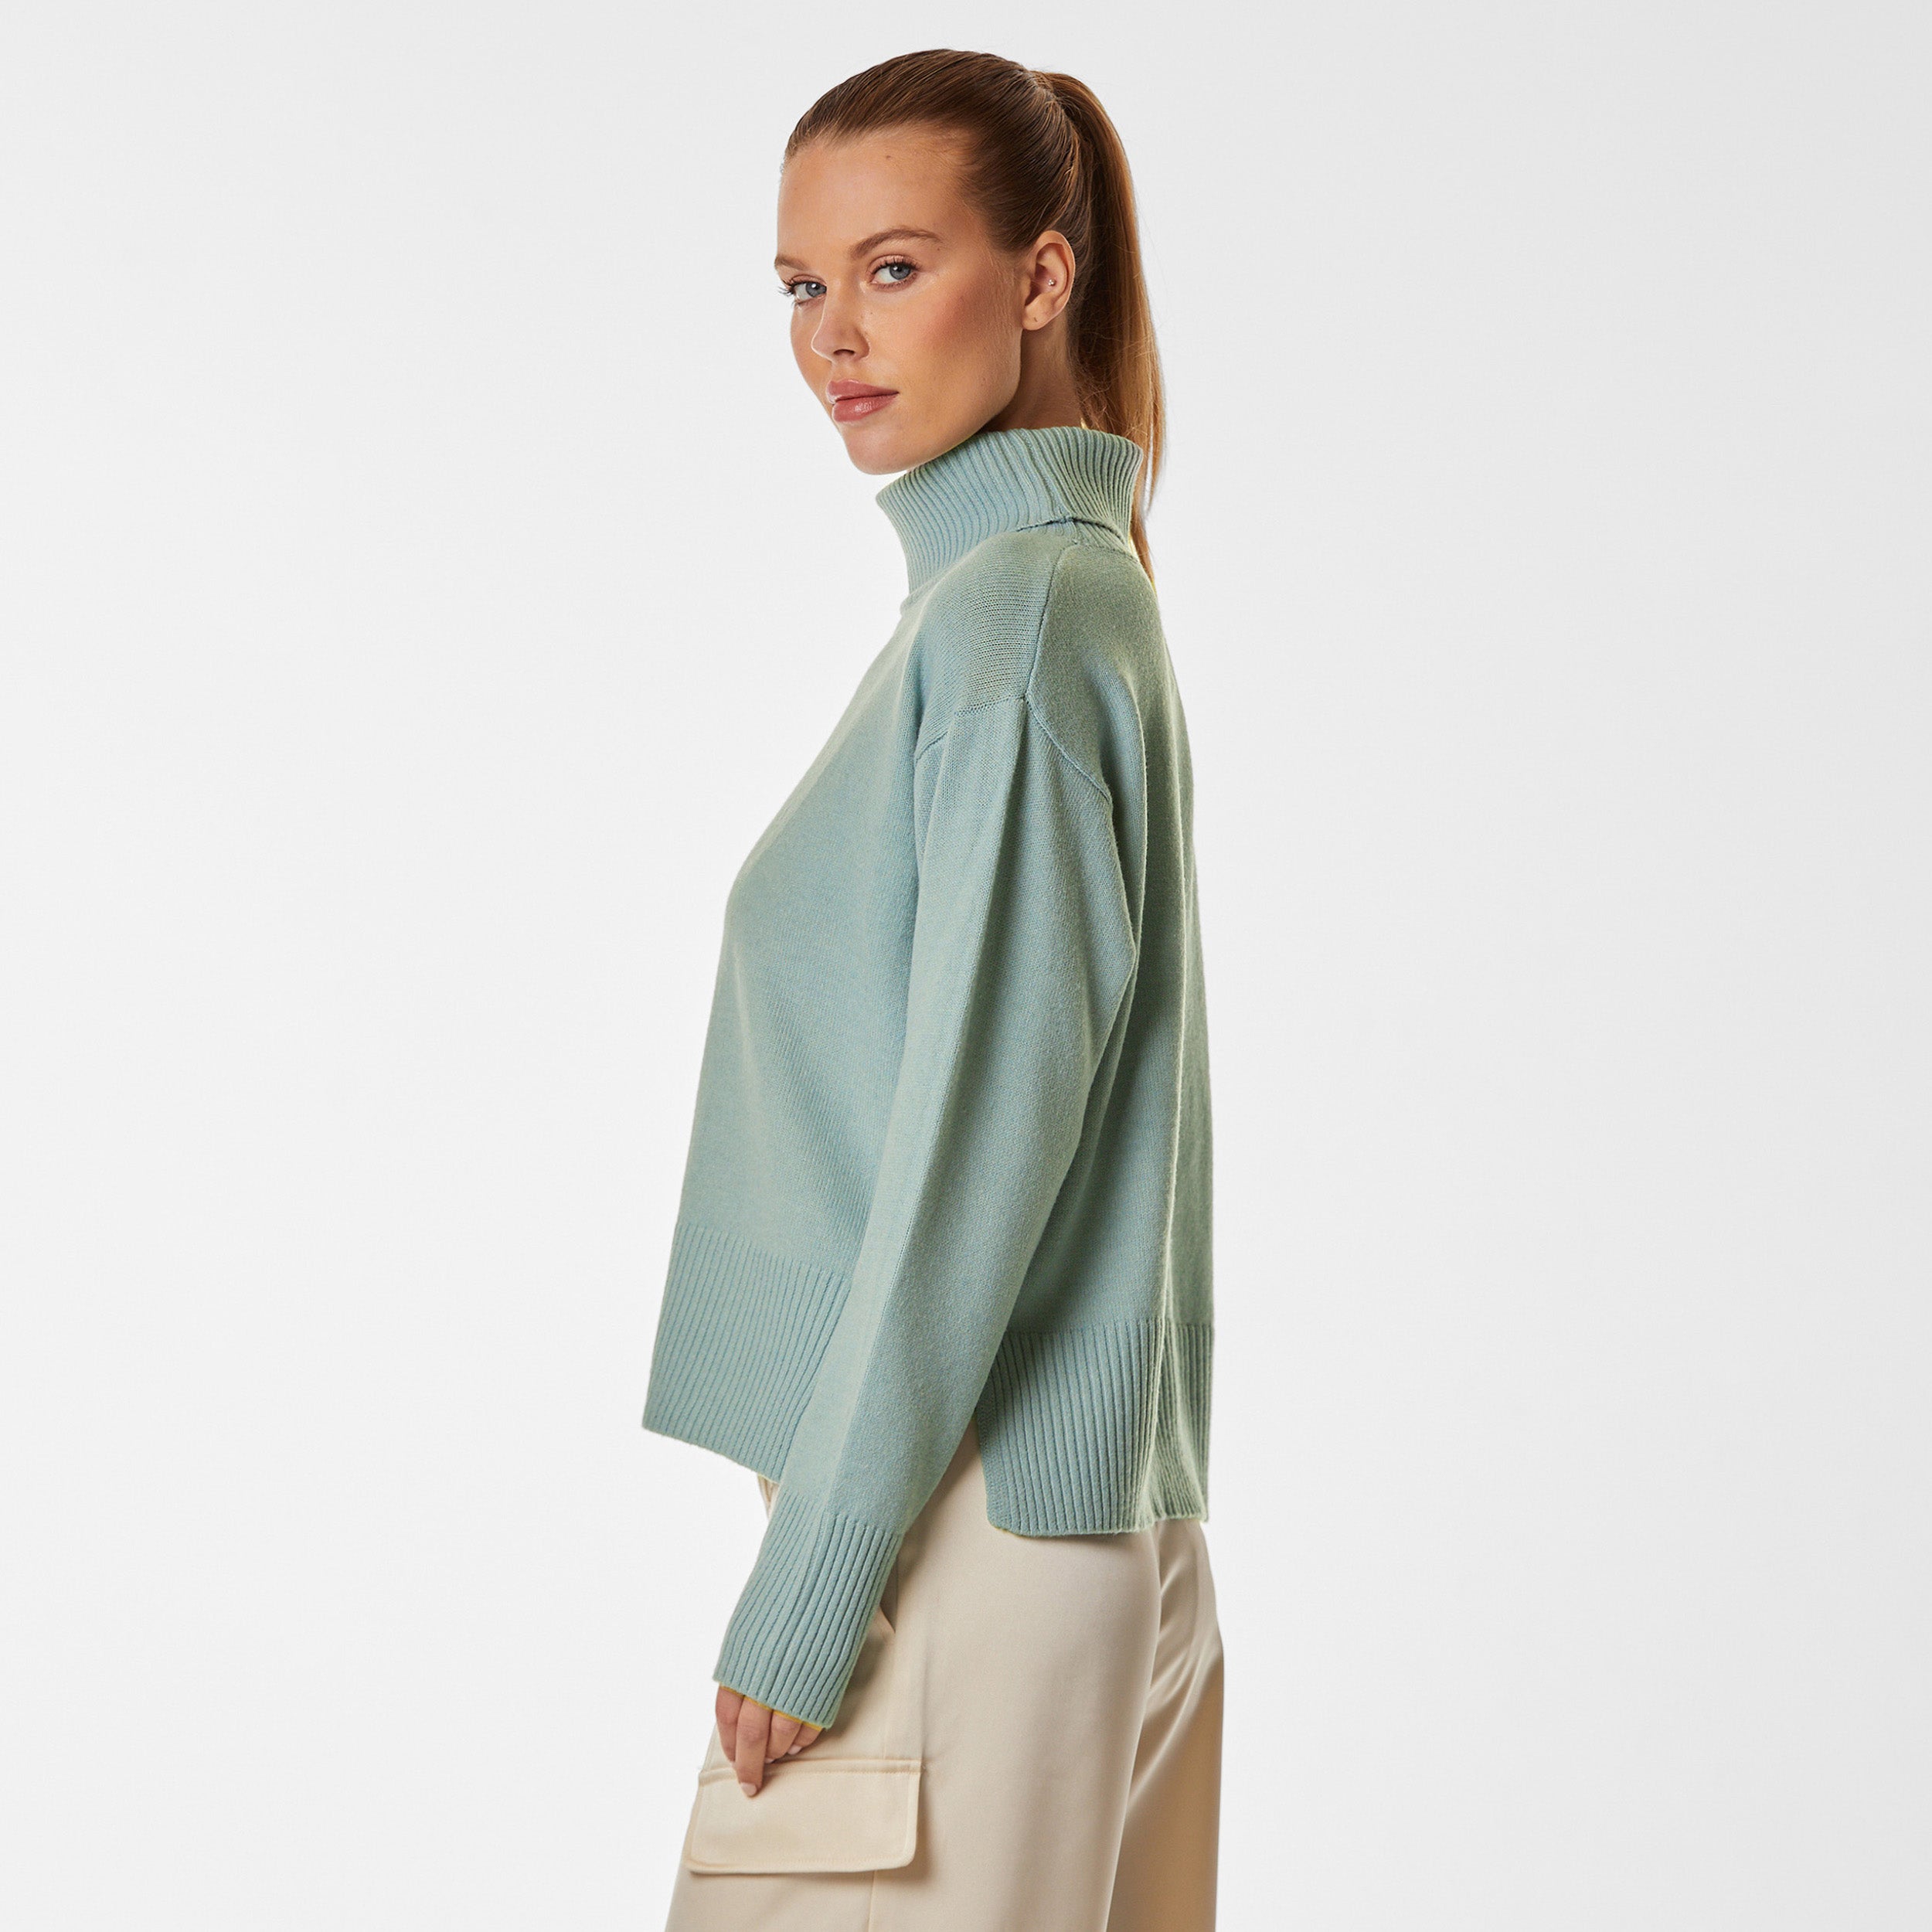 Side view of woman wearing green oversized sweater